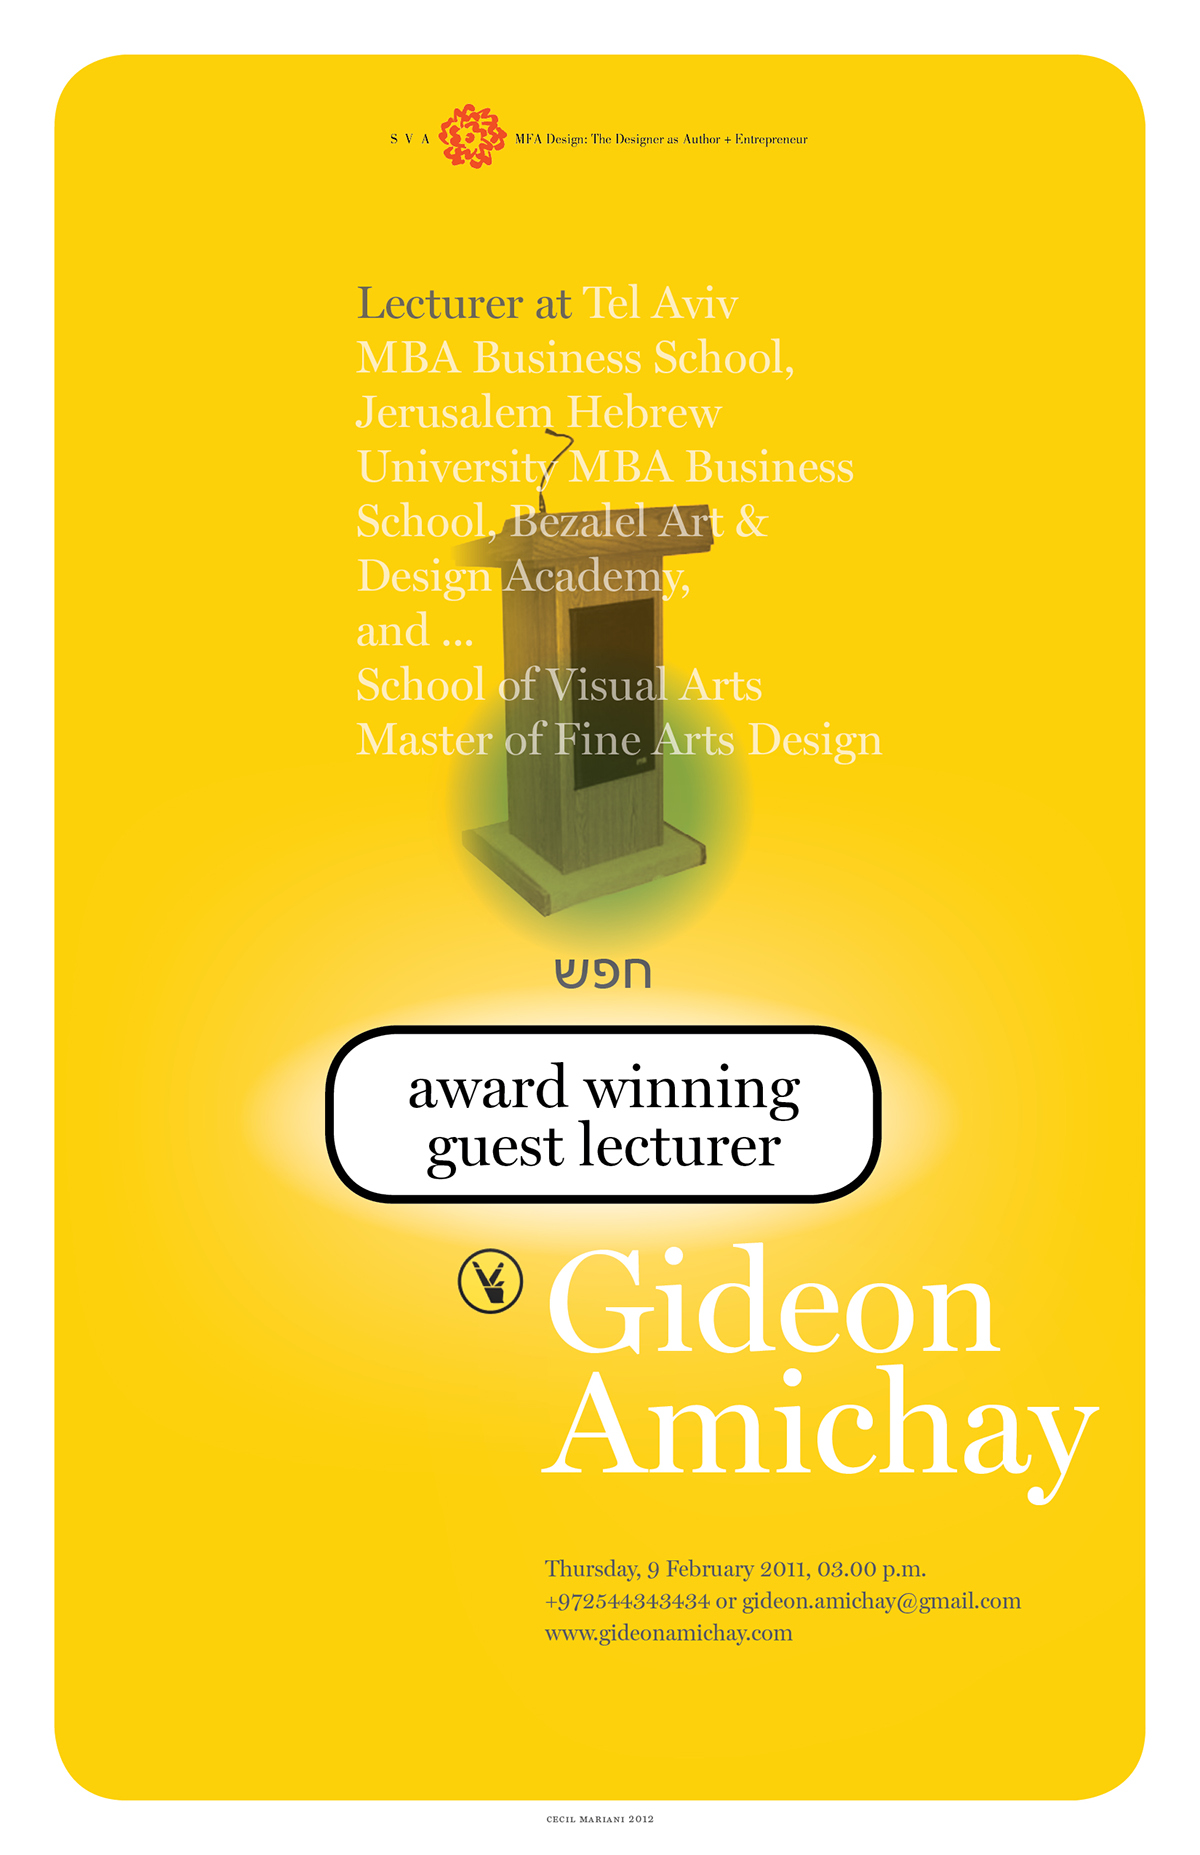 gideon amichay lecture poster sva  MFAD  guest lecture